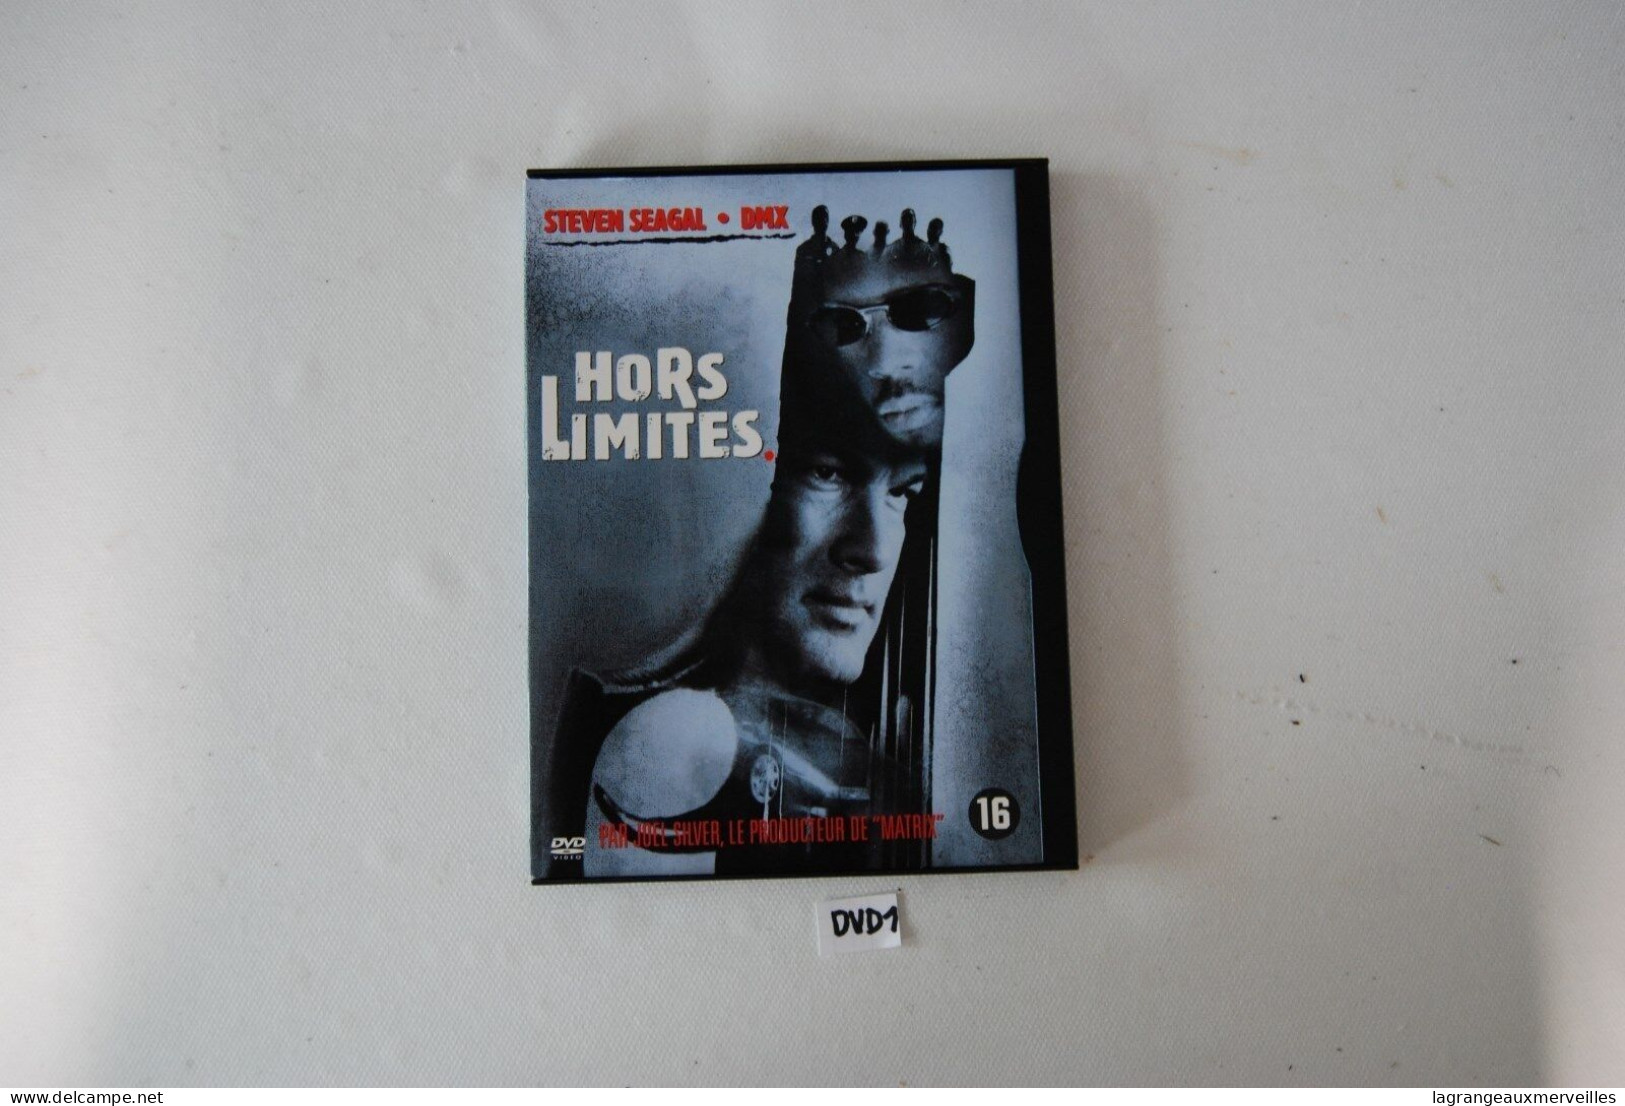 DVD 1 - HORS LIMITE - SEAGAL - Action, Adventure